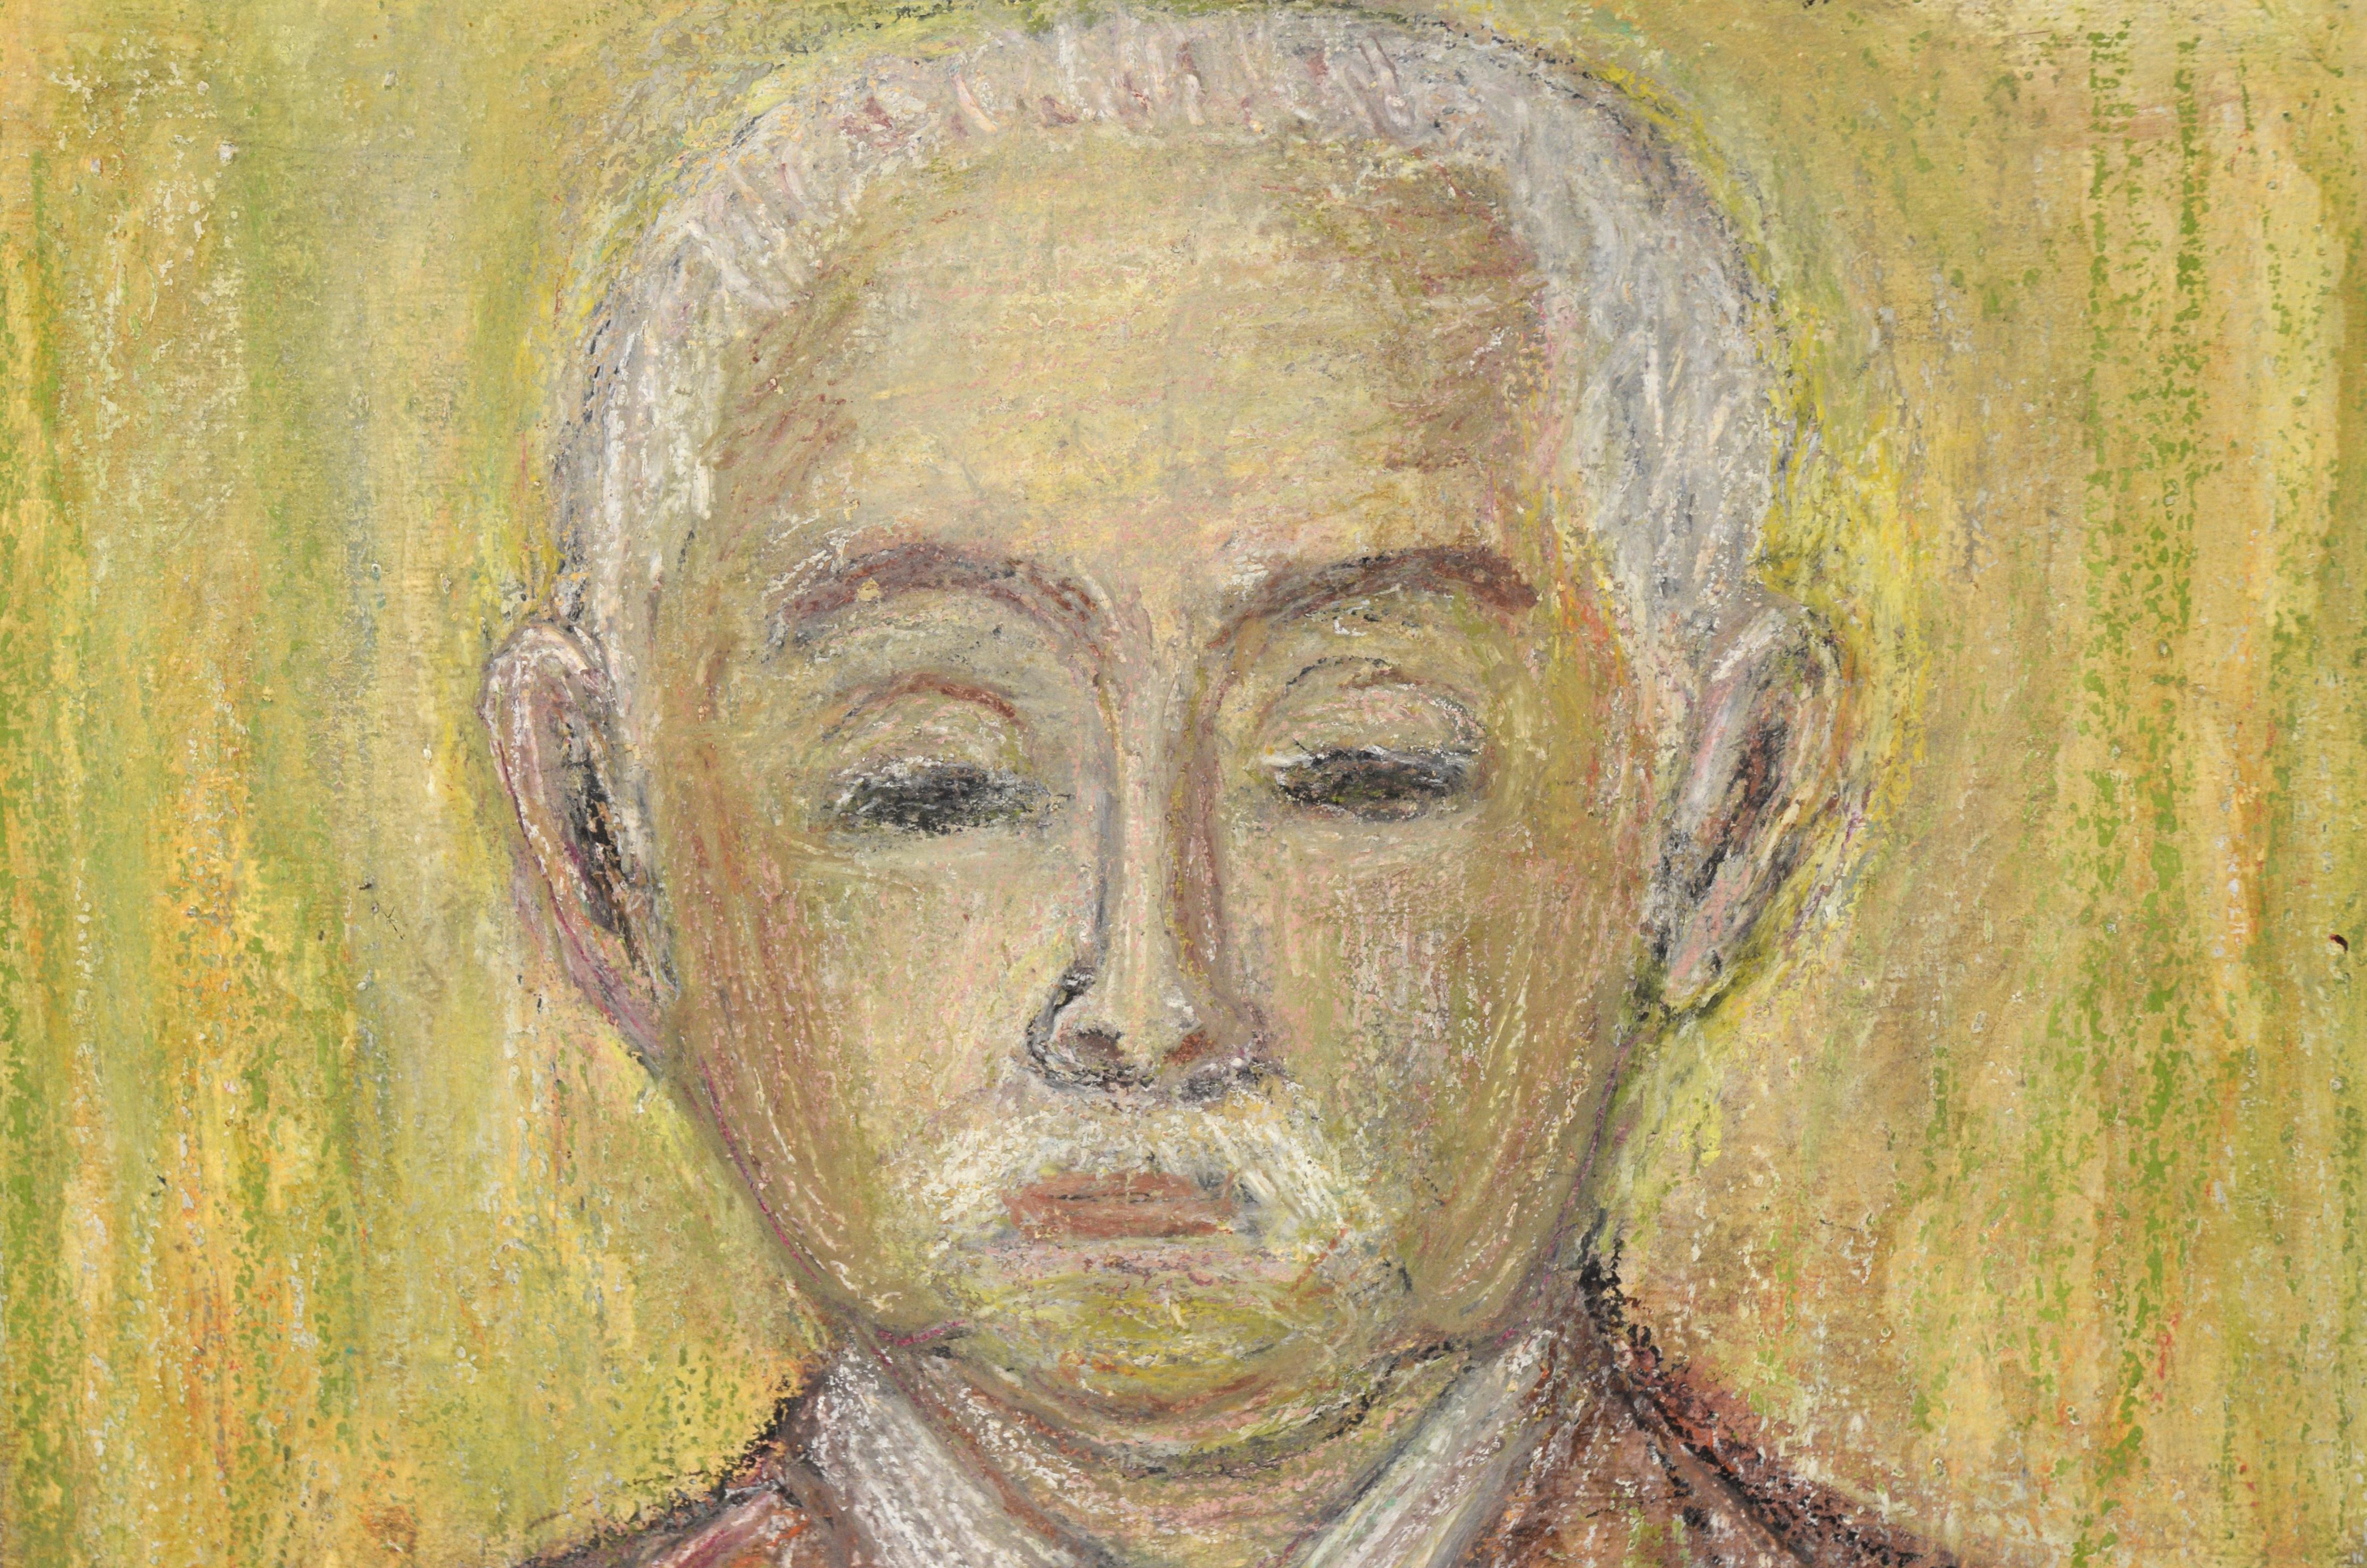 Portrait of a Man with White Hair and Mustache in Pastel on Cardstock

Portrait of a man by Honora Berg (American, 1897-1985). The man is looking directly at the viewer, with a neutral expression. He has white hair and a mustache, and is wearing a